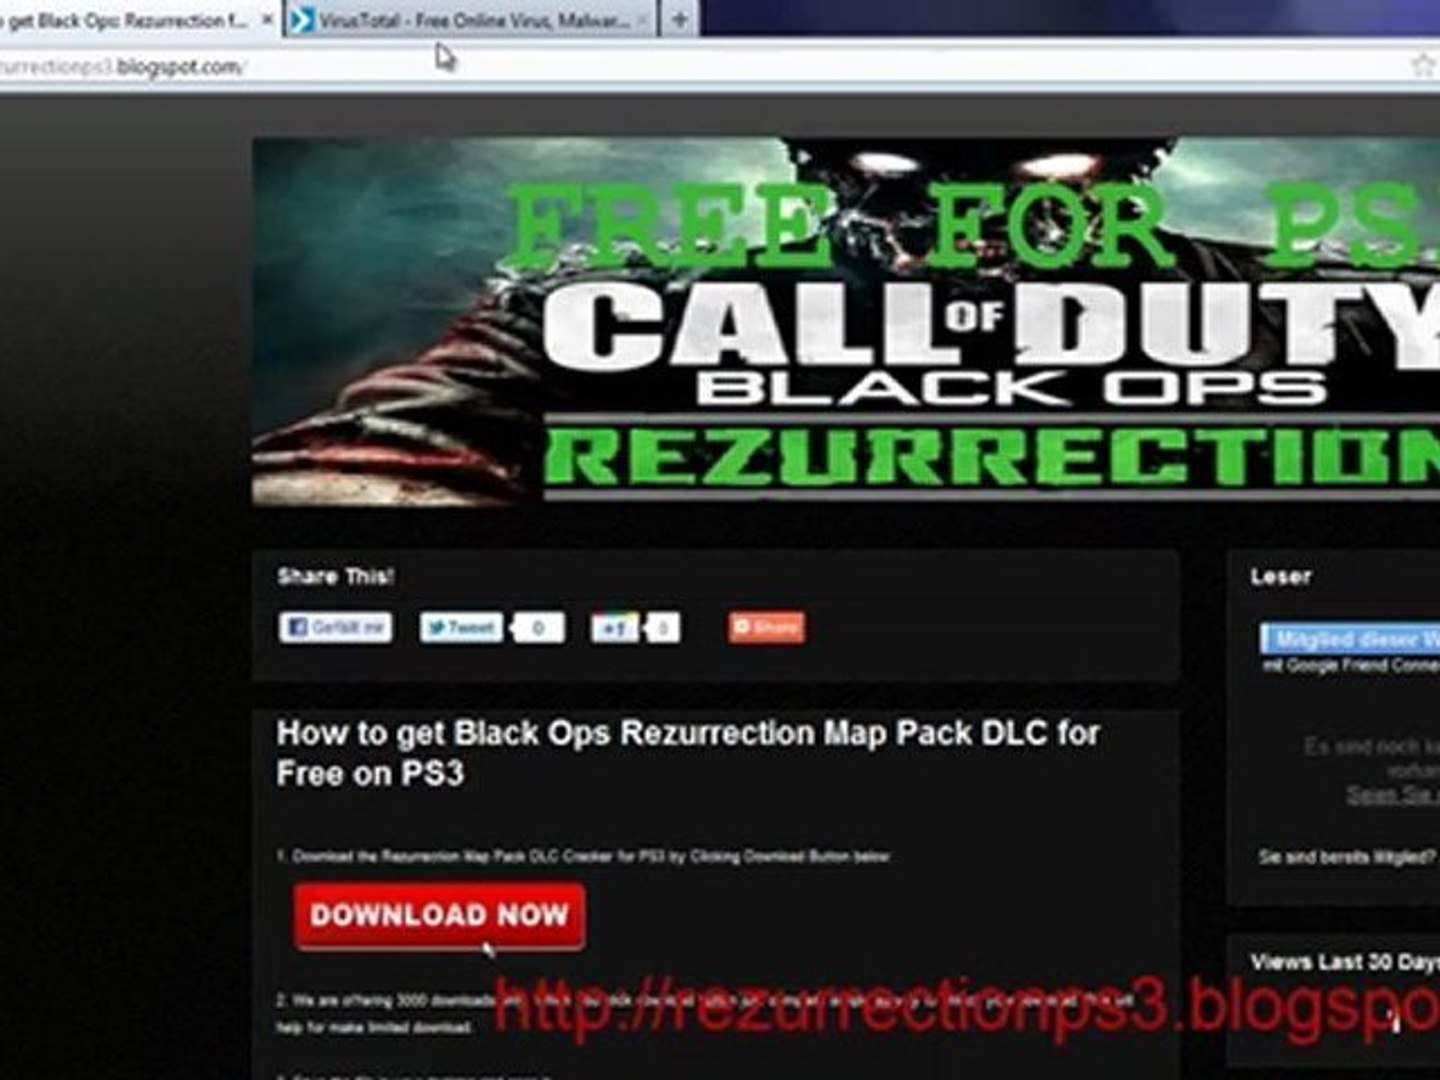 How to Install Black Ops Rezurrection Map Pack on PS3 - video Dailymotion